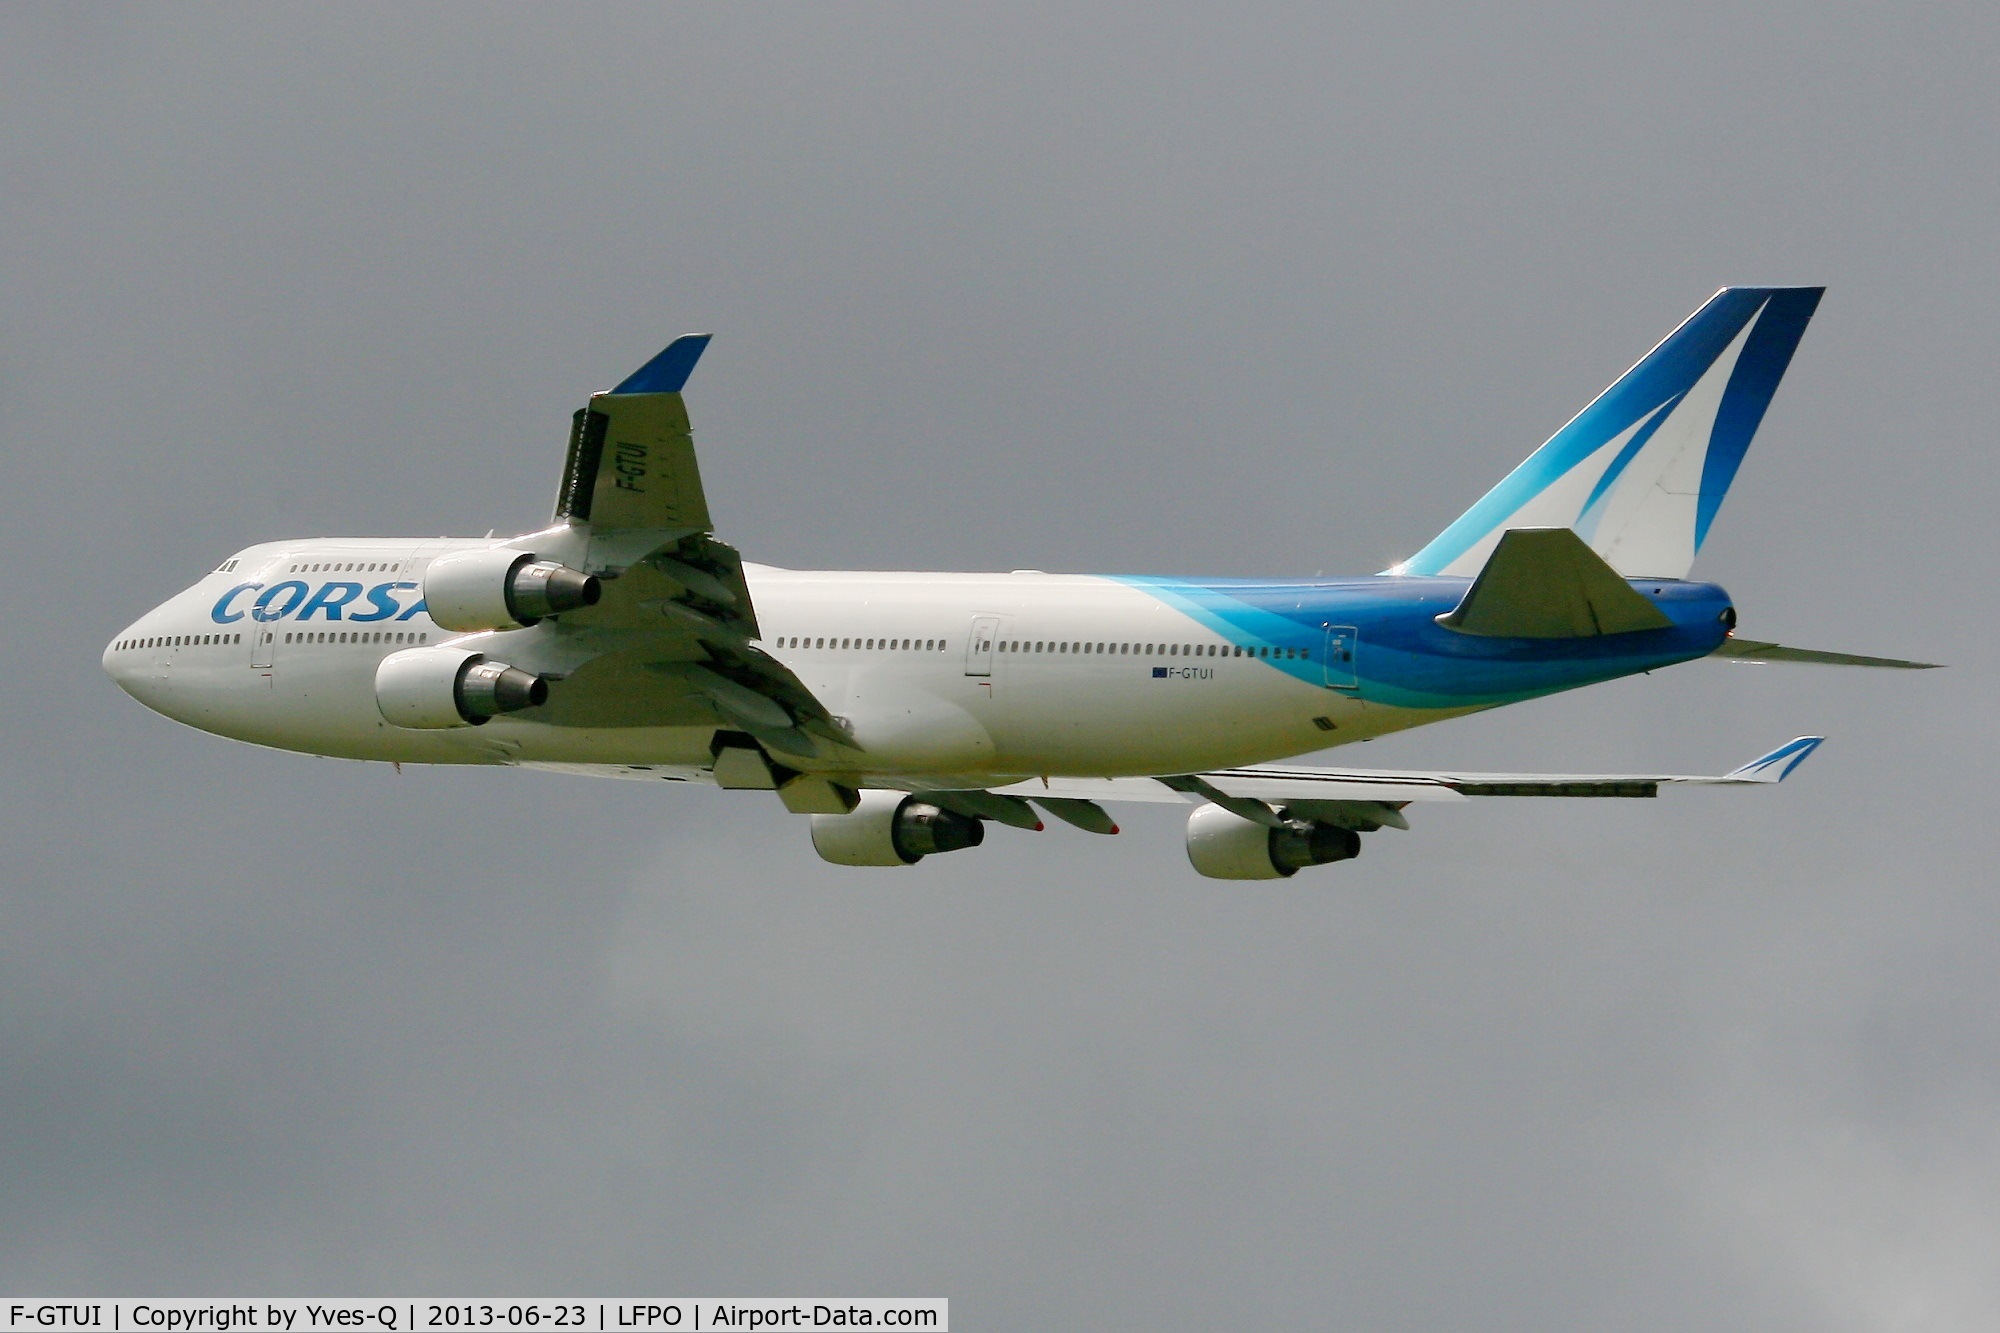 F-GTUI, 1992 Boeing 747-422 C/N 26875, Boeing 747-422 Takes off Rwy 24, Paris-Orly Airport (LFPO-ORY)